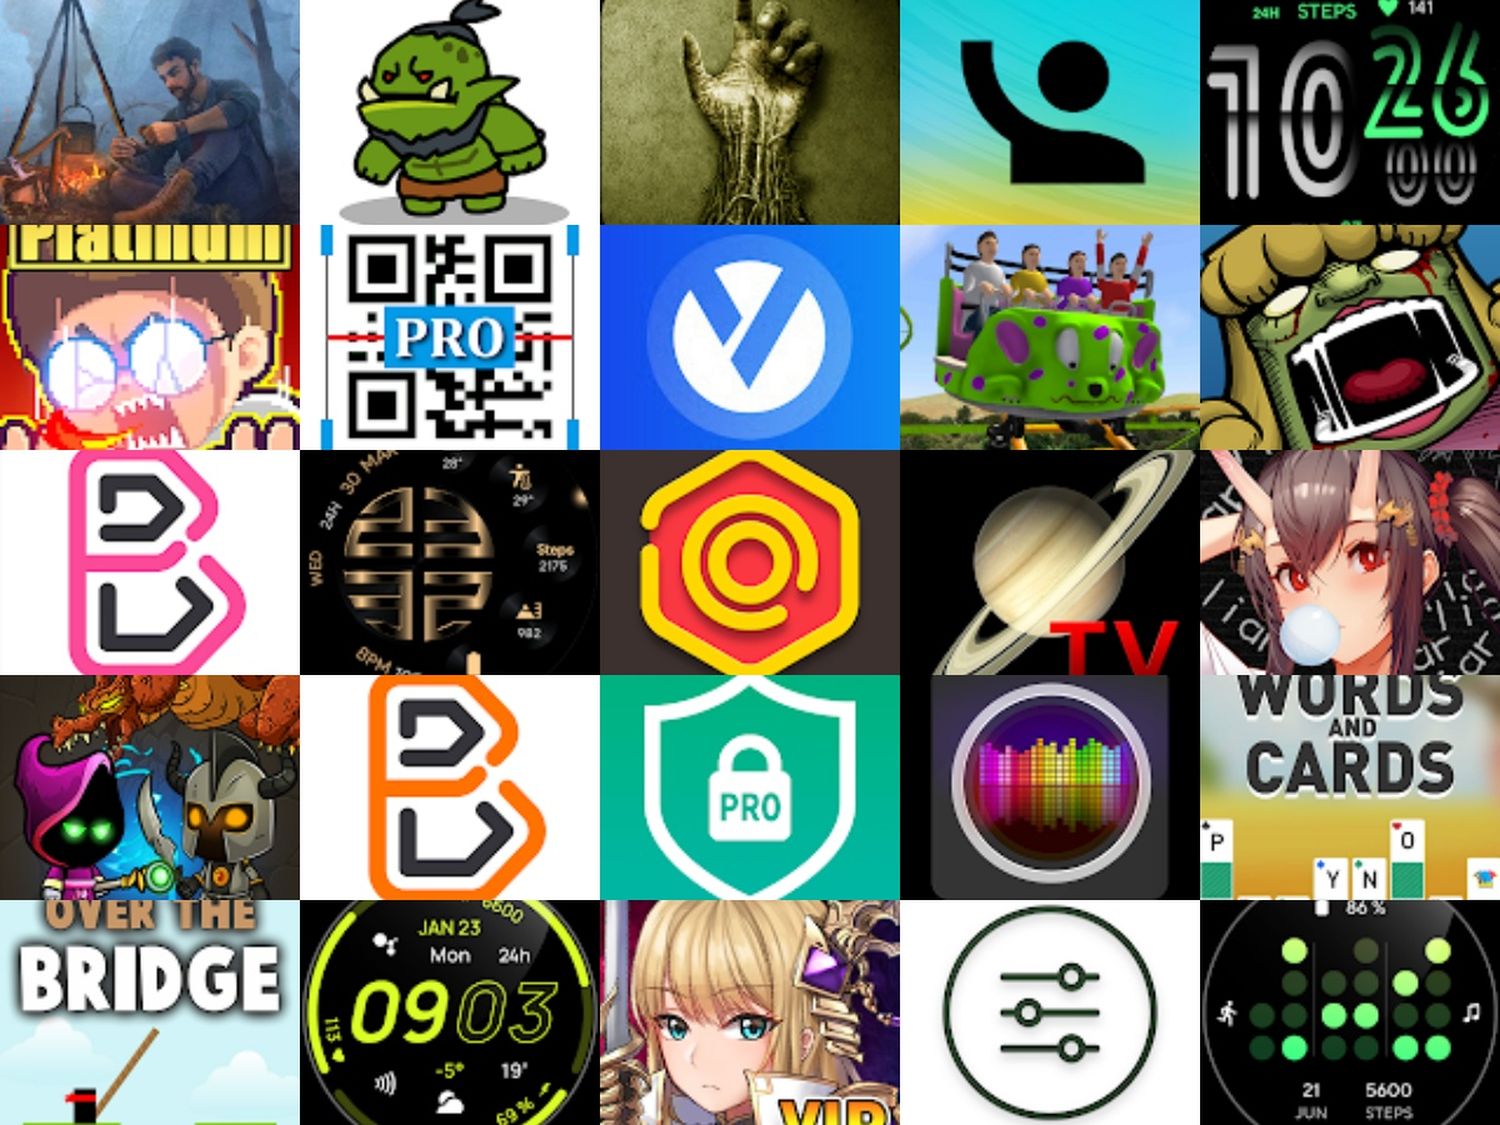 Google-Play-Store-Aktion-Diese-55-Android-Apps-Spiele-Icon-Packs-Live-Wallpaper-gibt-es-heute-Gratis